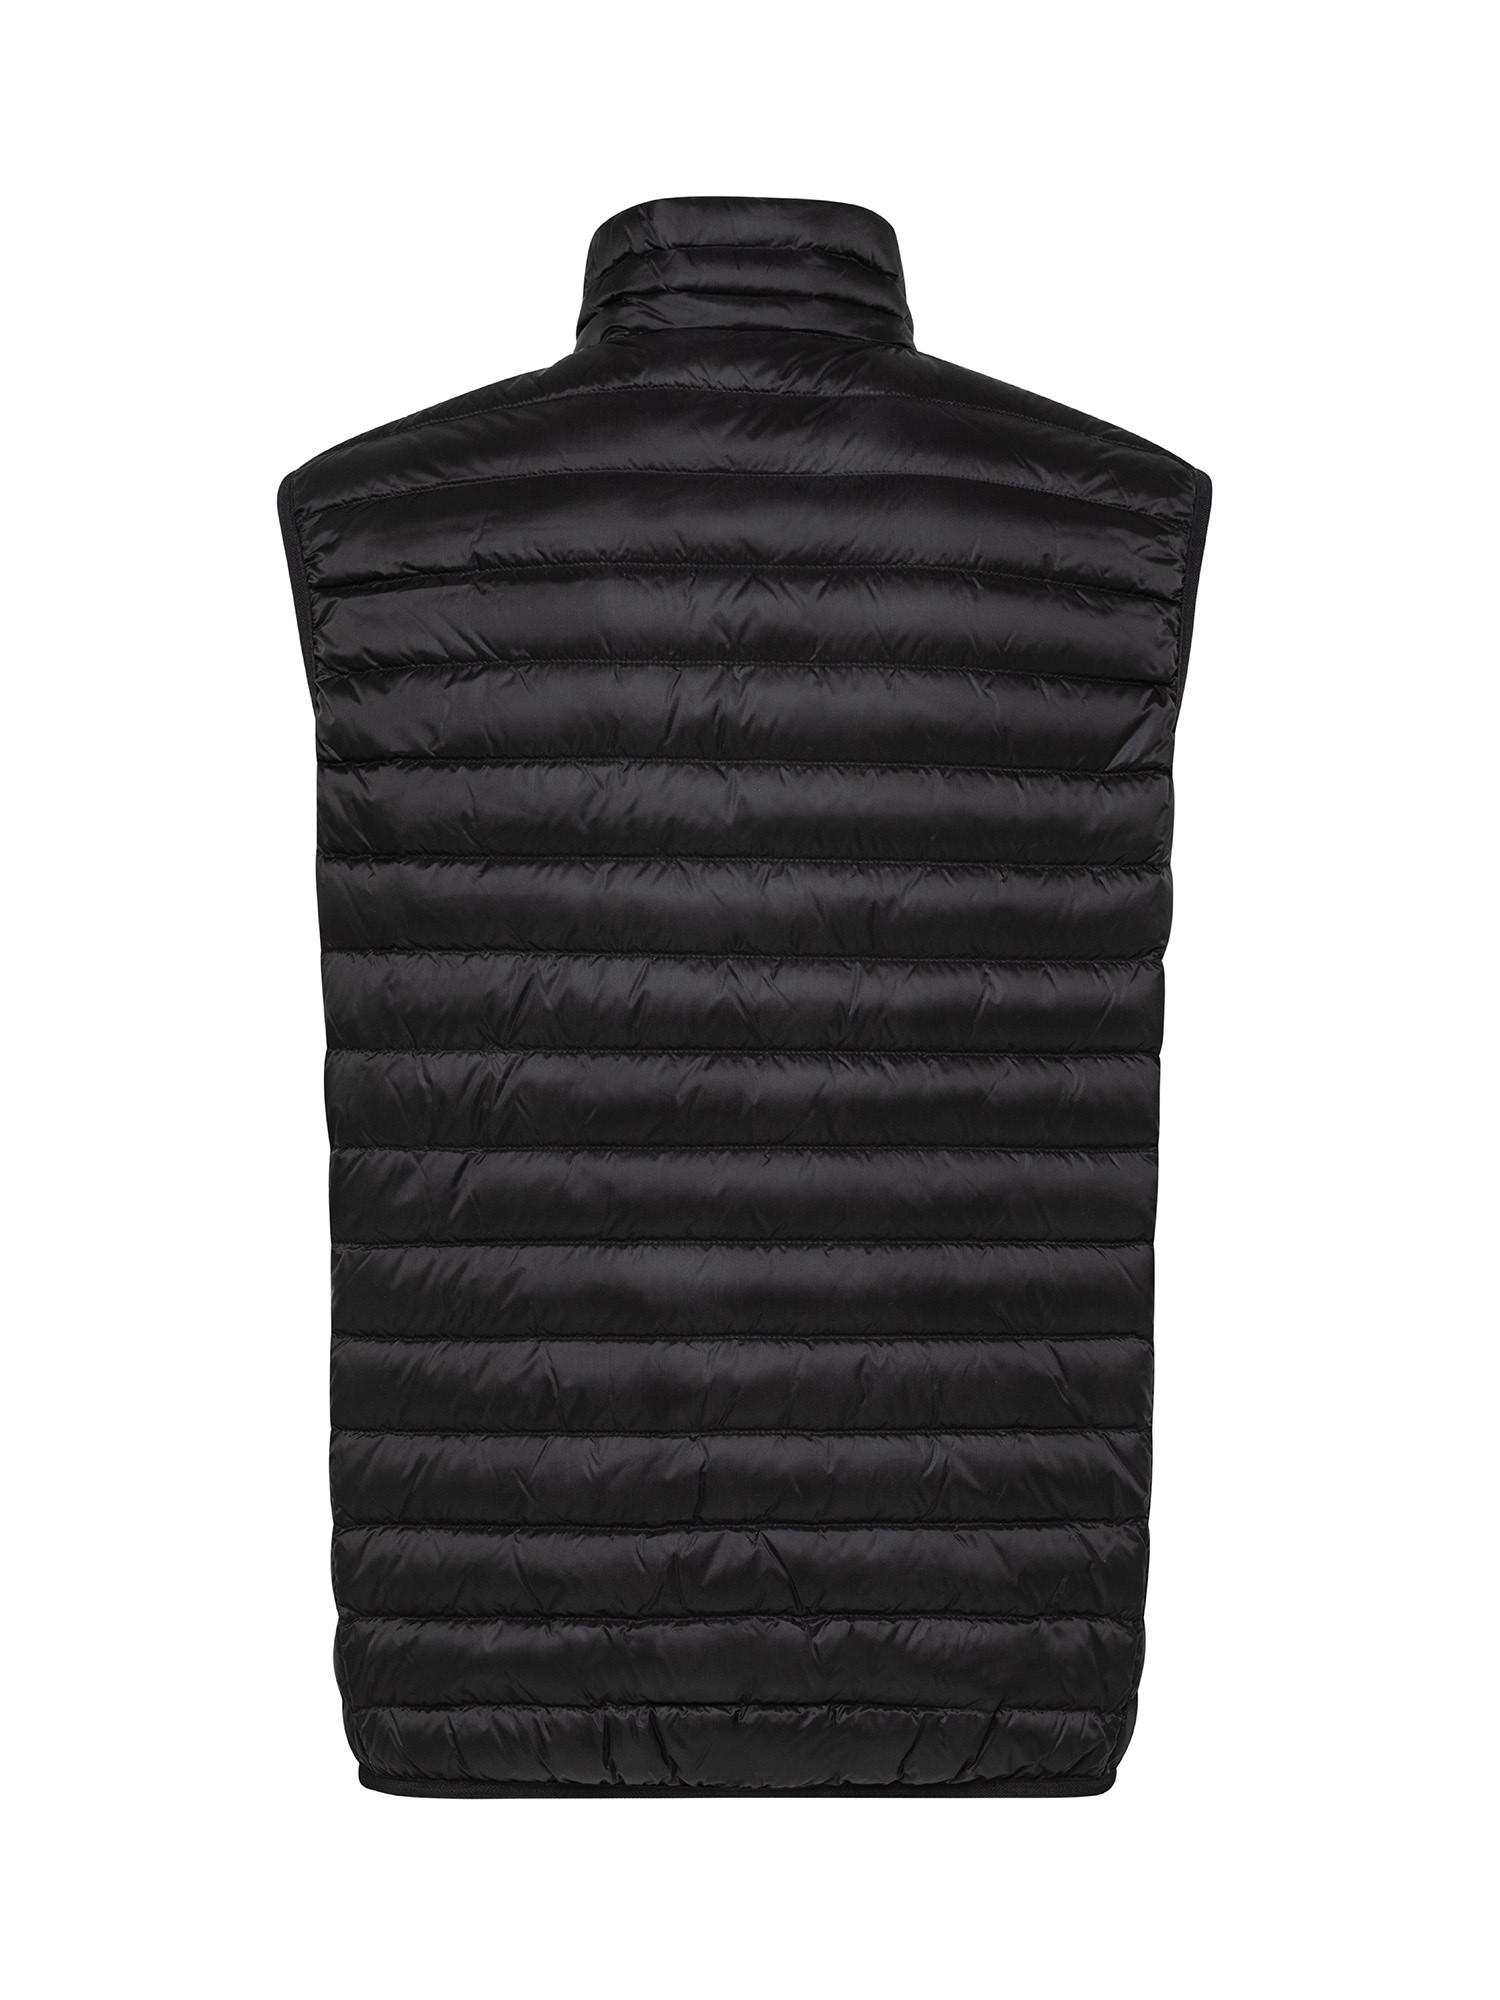 Ciesse Piumini - Full zip quilted gilet in nylon, Black, large image number 1